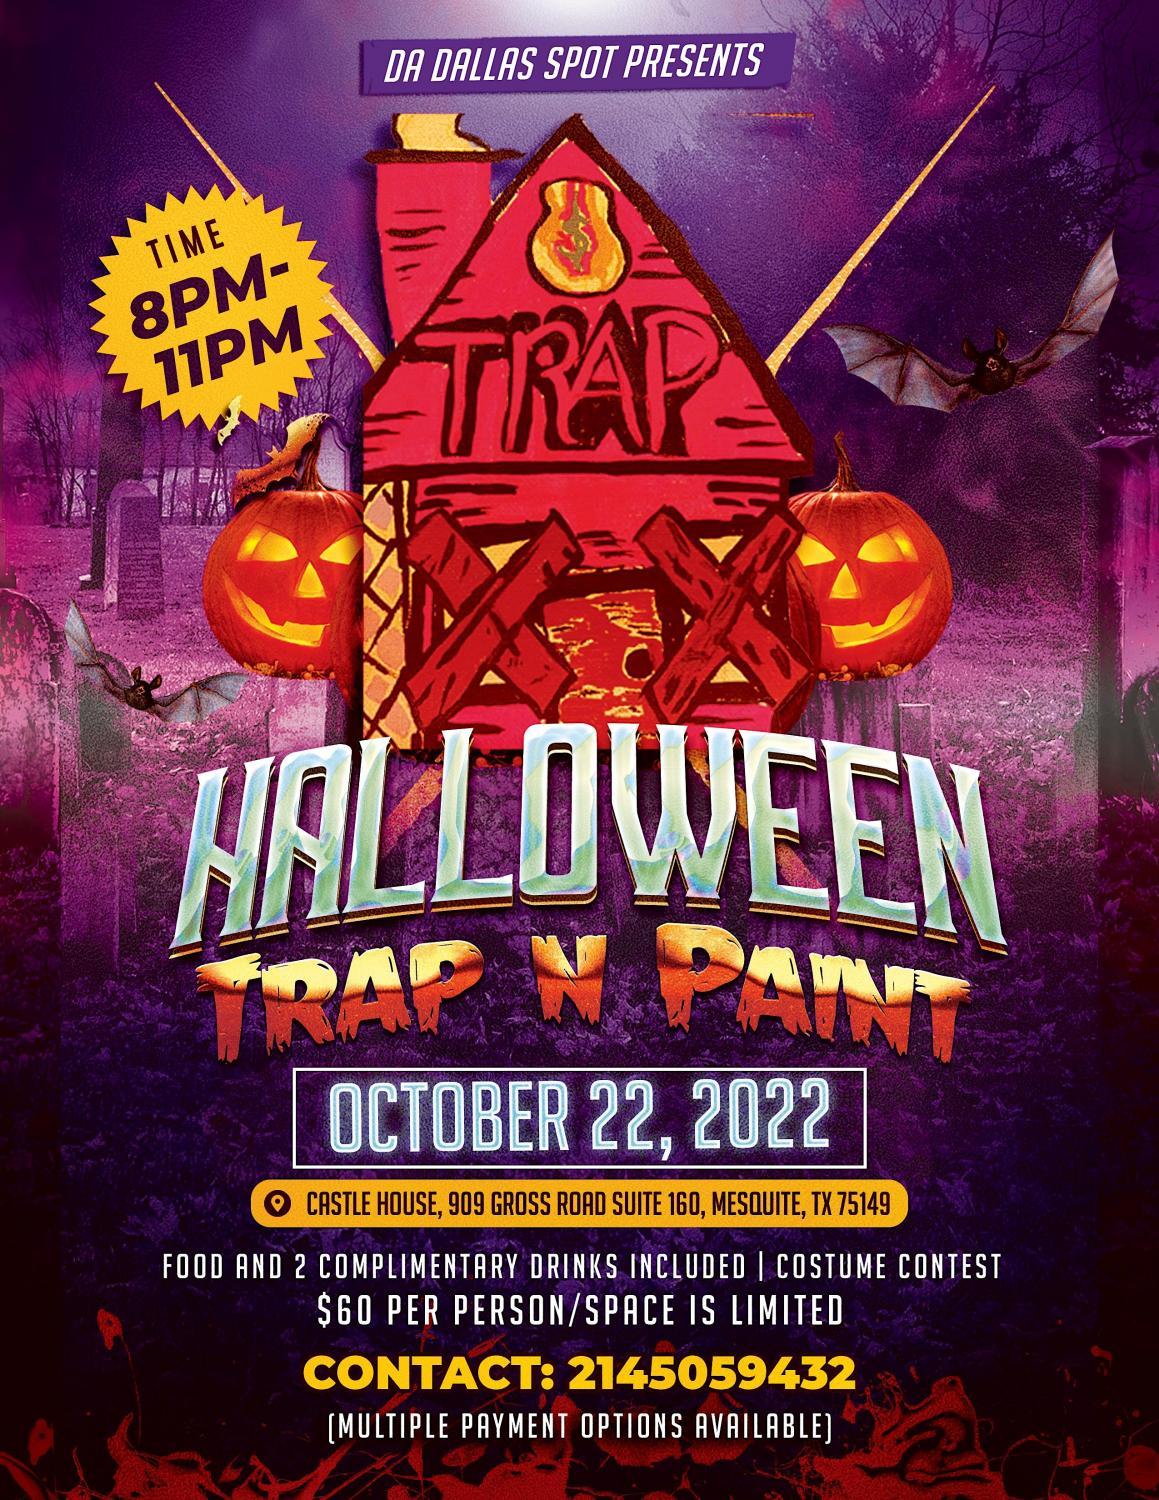 Halloween Trap n Paint
Sat Oct 22, 8:00 PM - Sat Oct 22, 11:00 PM
in 3 days